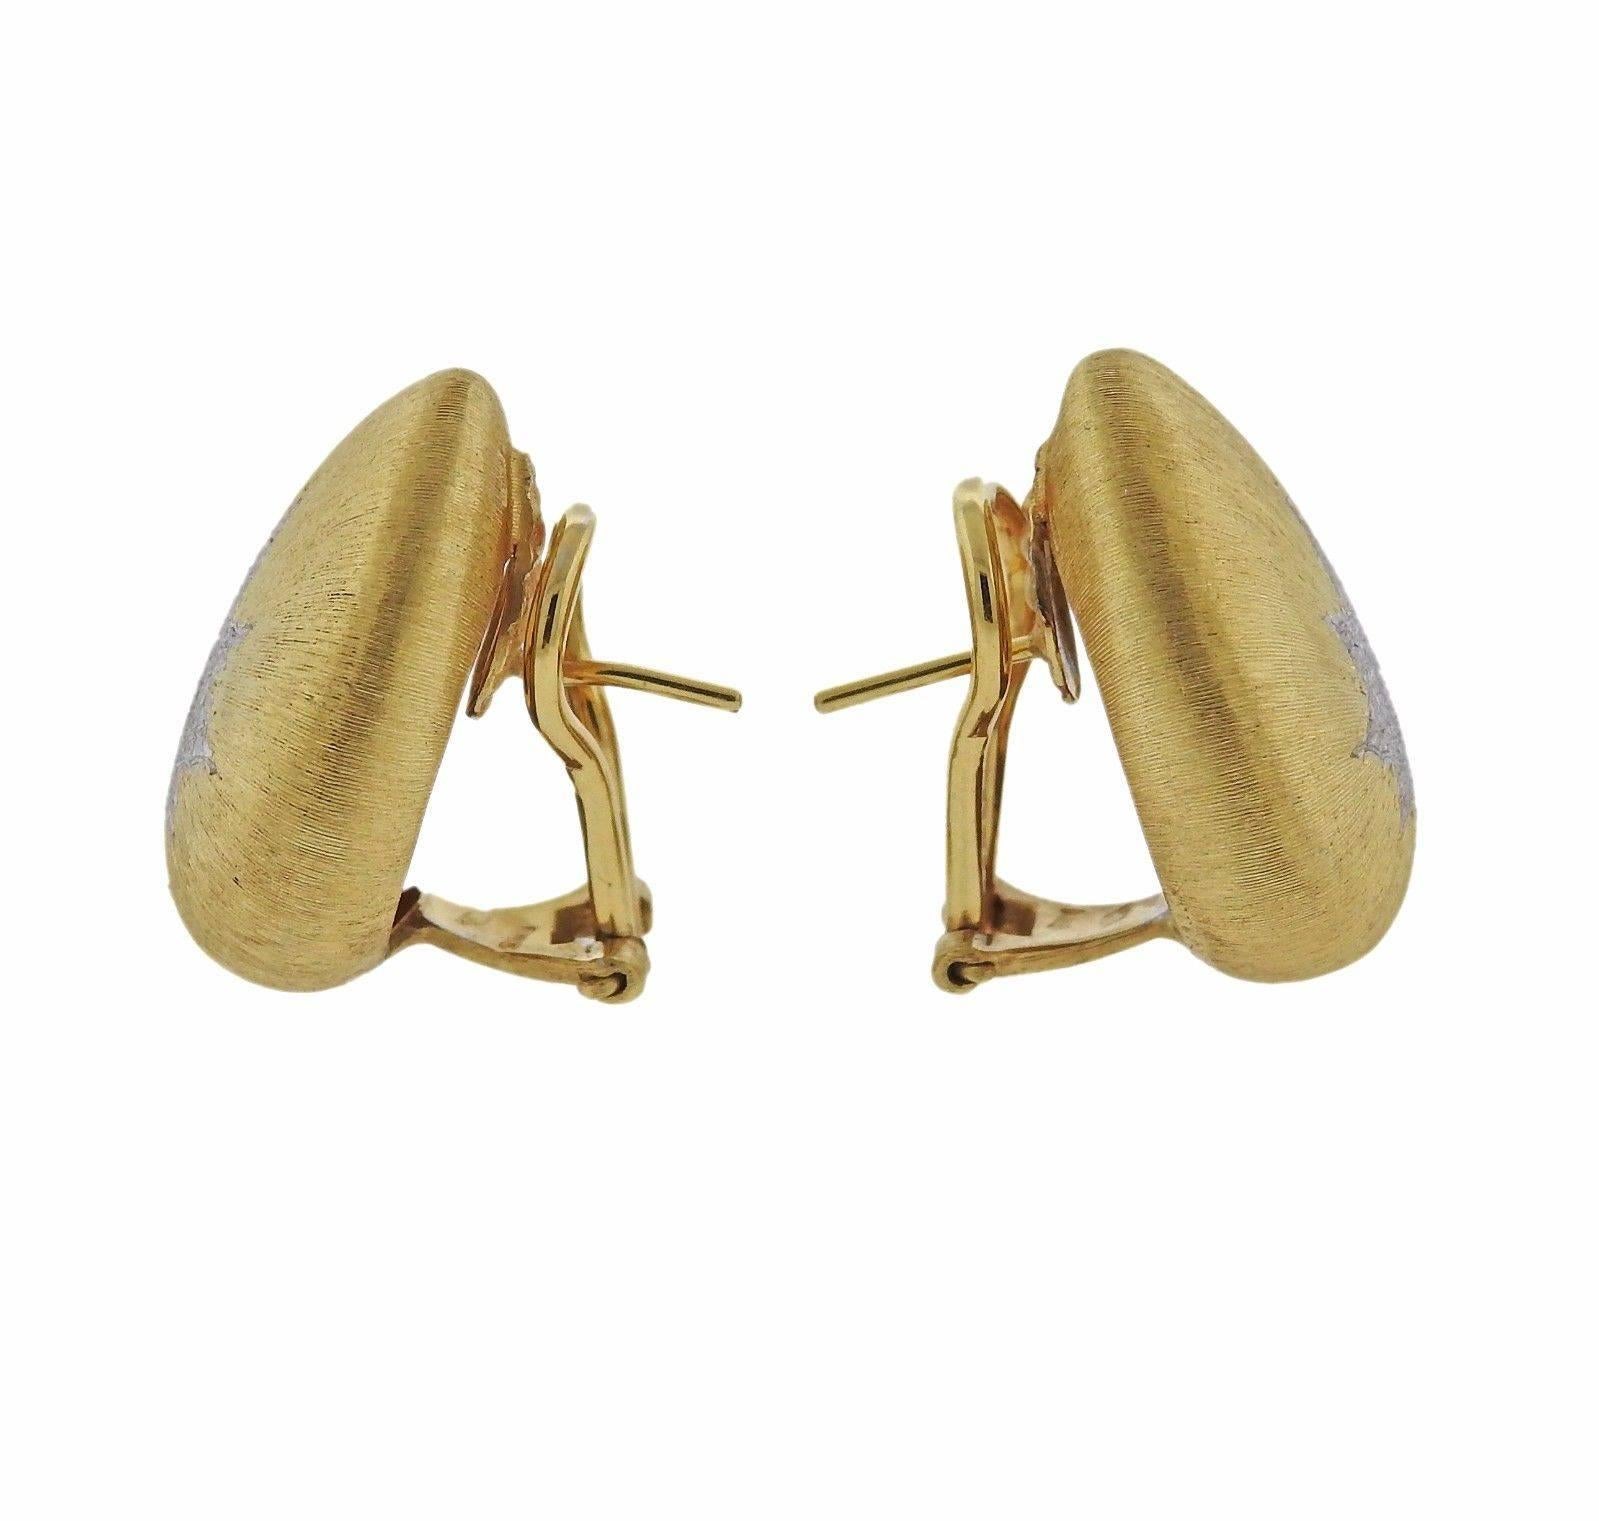 A pair of 18k yellow and white gold earrings by Buccellati.  The earrings measure 22mm x 18mm and weigh 14.8 grams.  Marked: Buccellati,Italy, 18k,P4026.  The current retail is $10100.